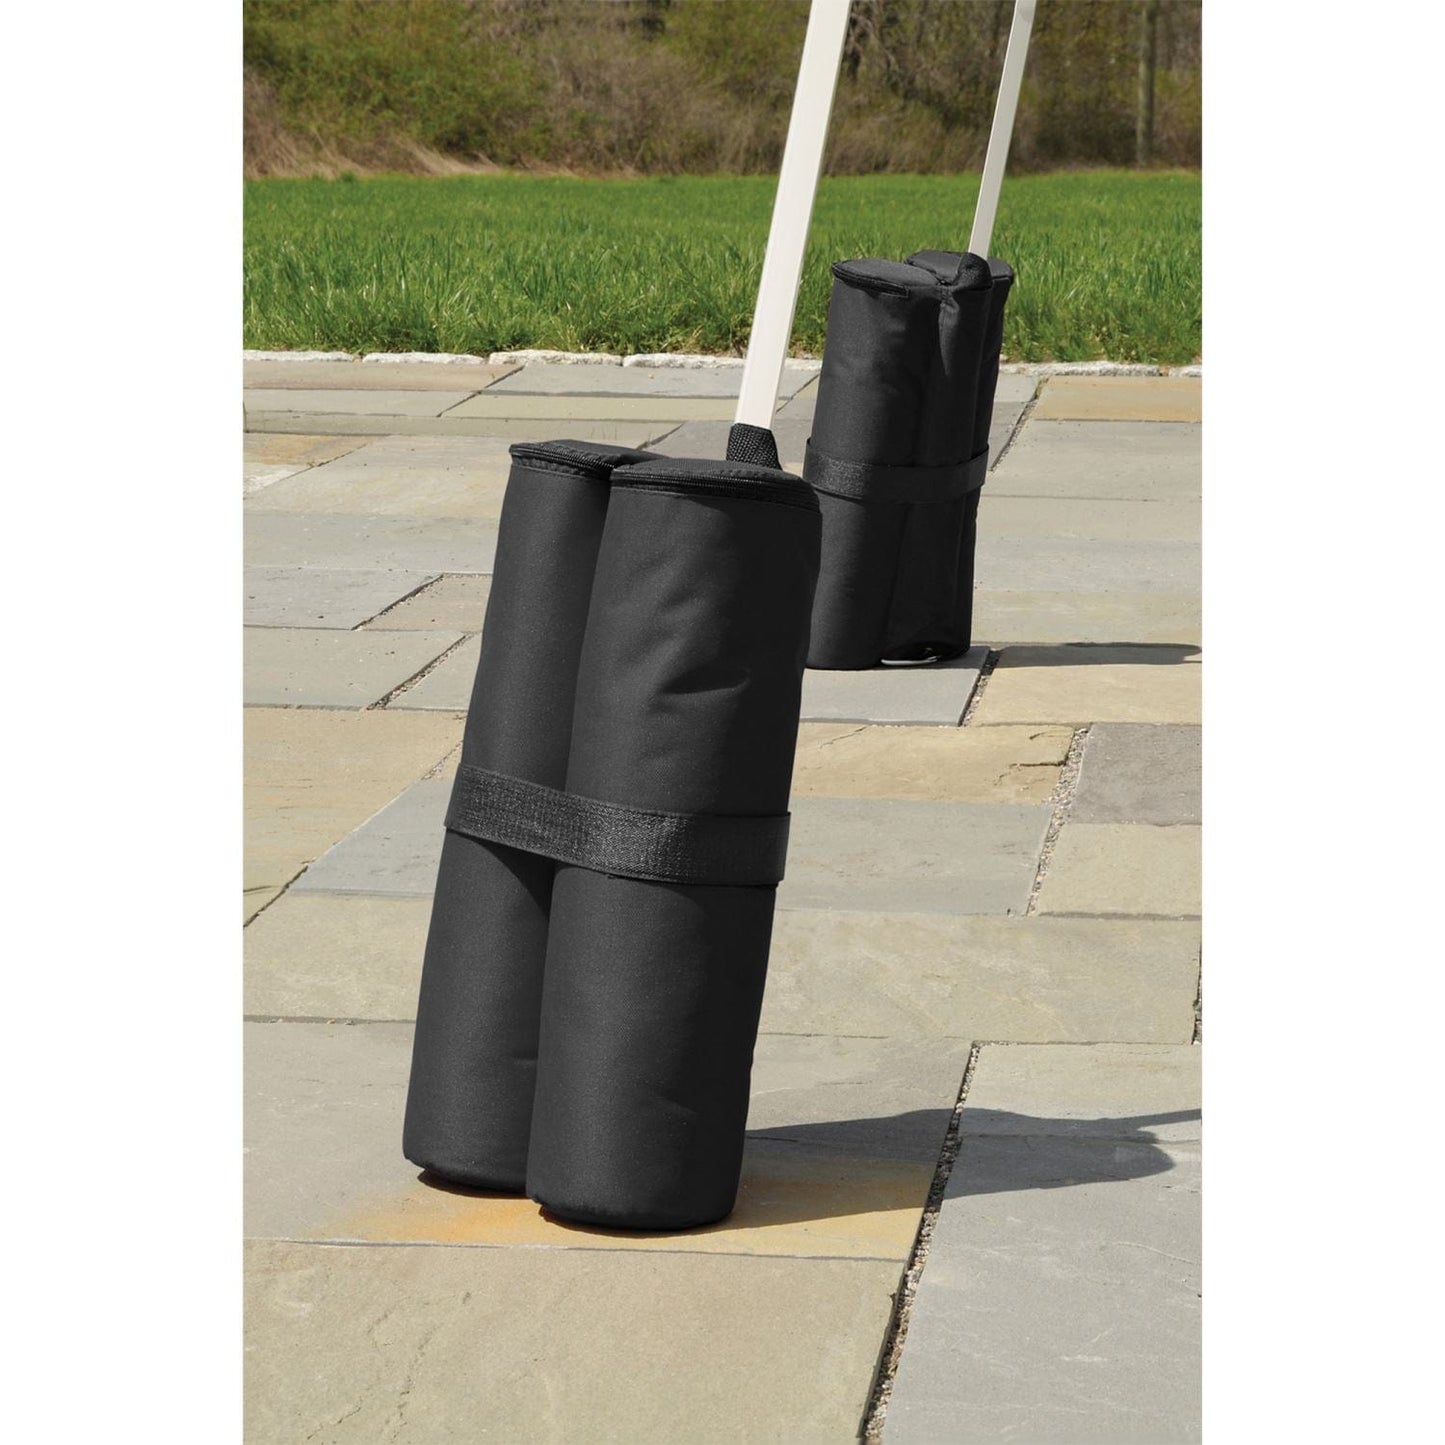 ShelterLogic Canopy Accessories ShelterLogic | Canopy Anchor Bag - 4 Pack for Pop-Up Canopy 15883